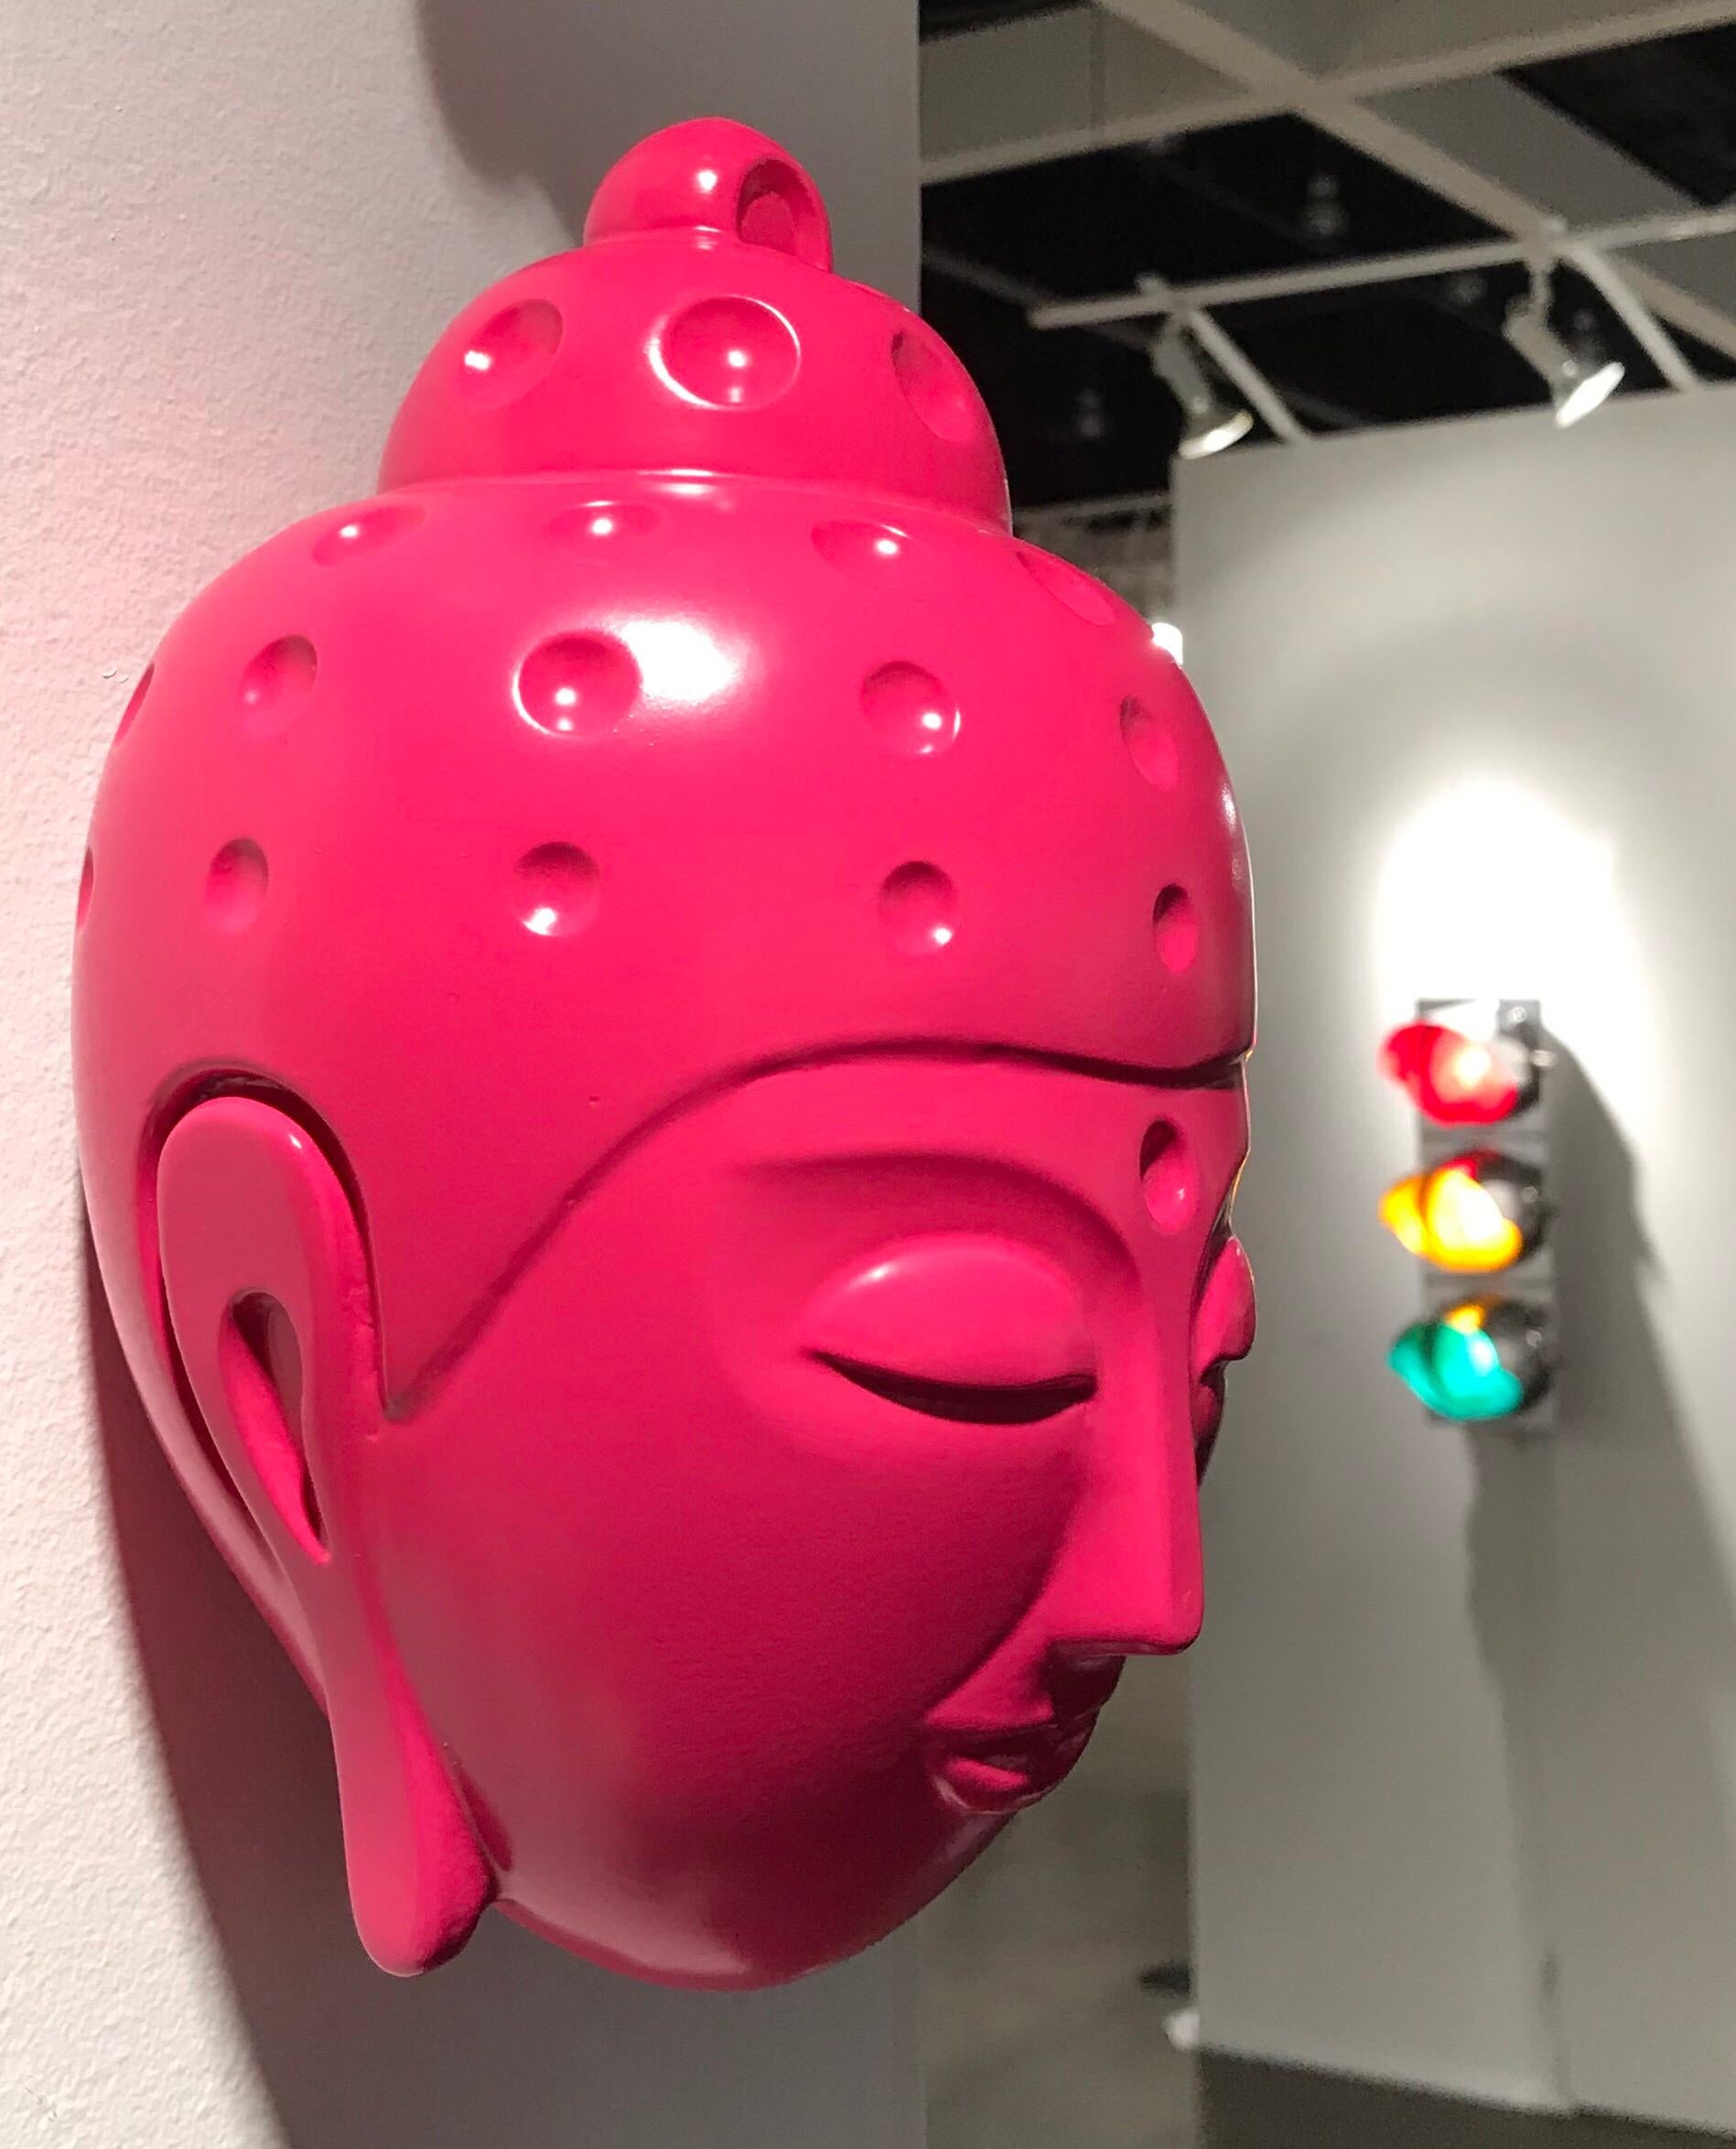 Floating Buddha head Statue - Bright Pink - Black Figurative Sculpture by Tal Nehoray